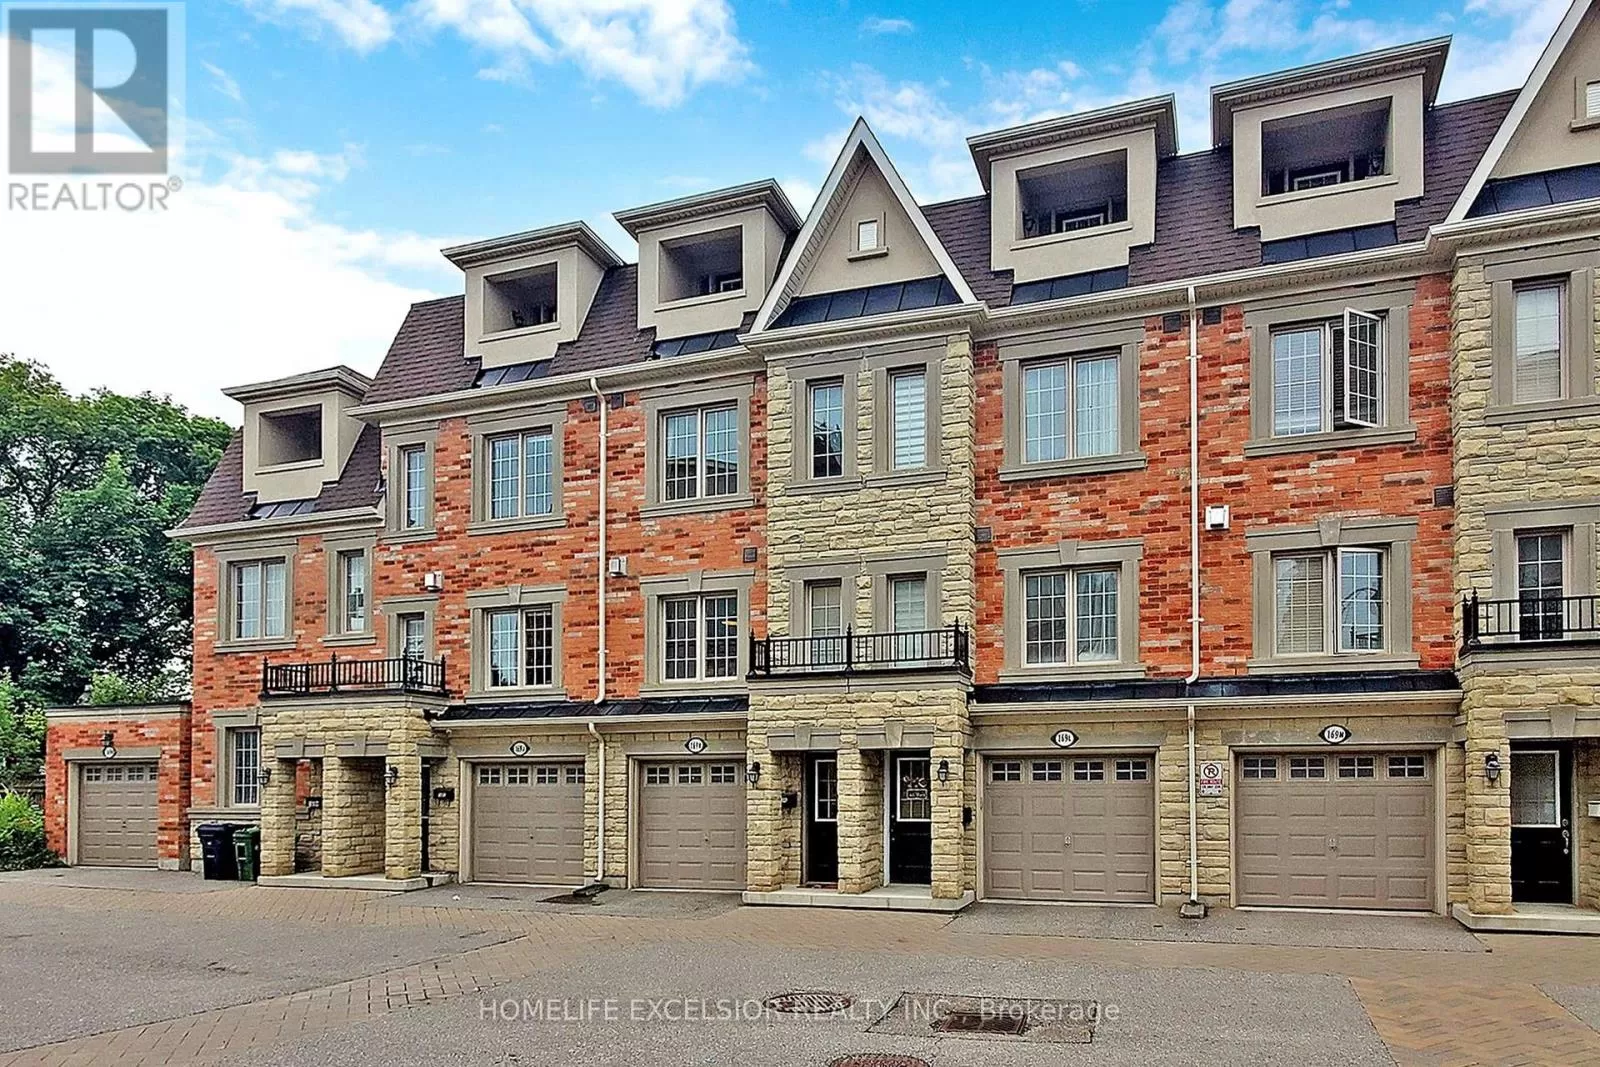 Row / Townhouse for rent: K - 169 Finch Avenue E, Toronto, Ontario M2N 4R8